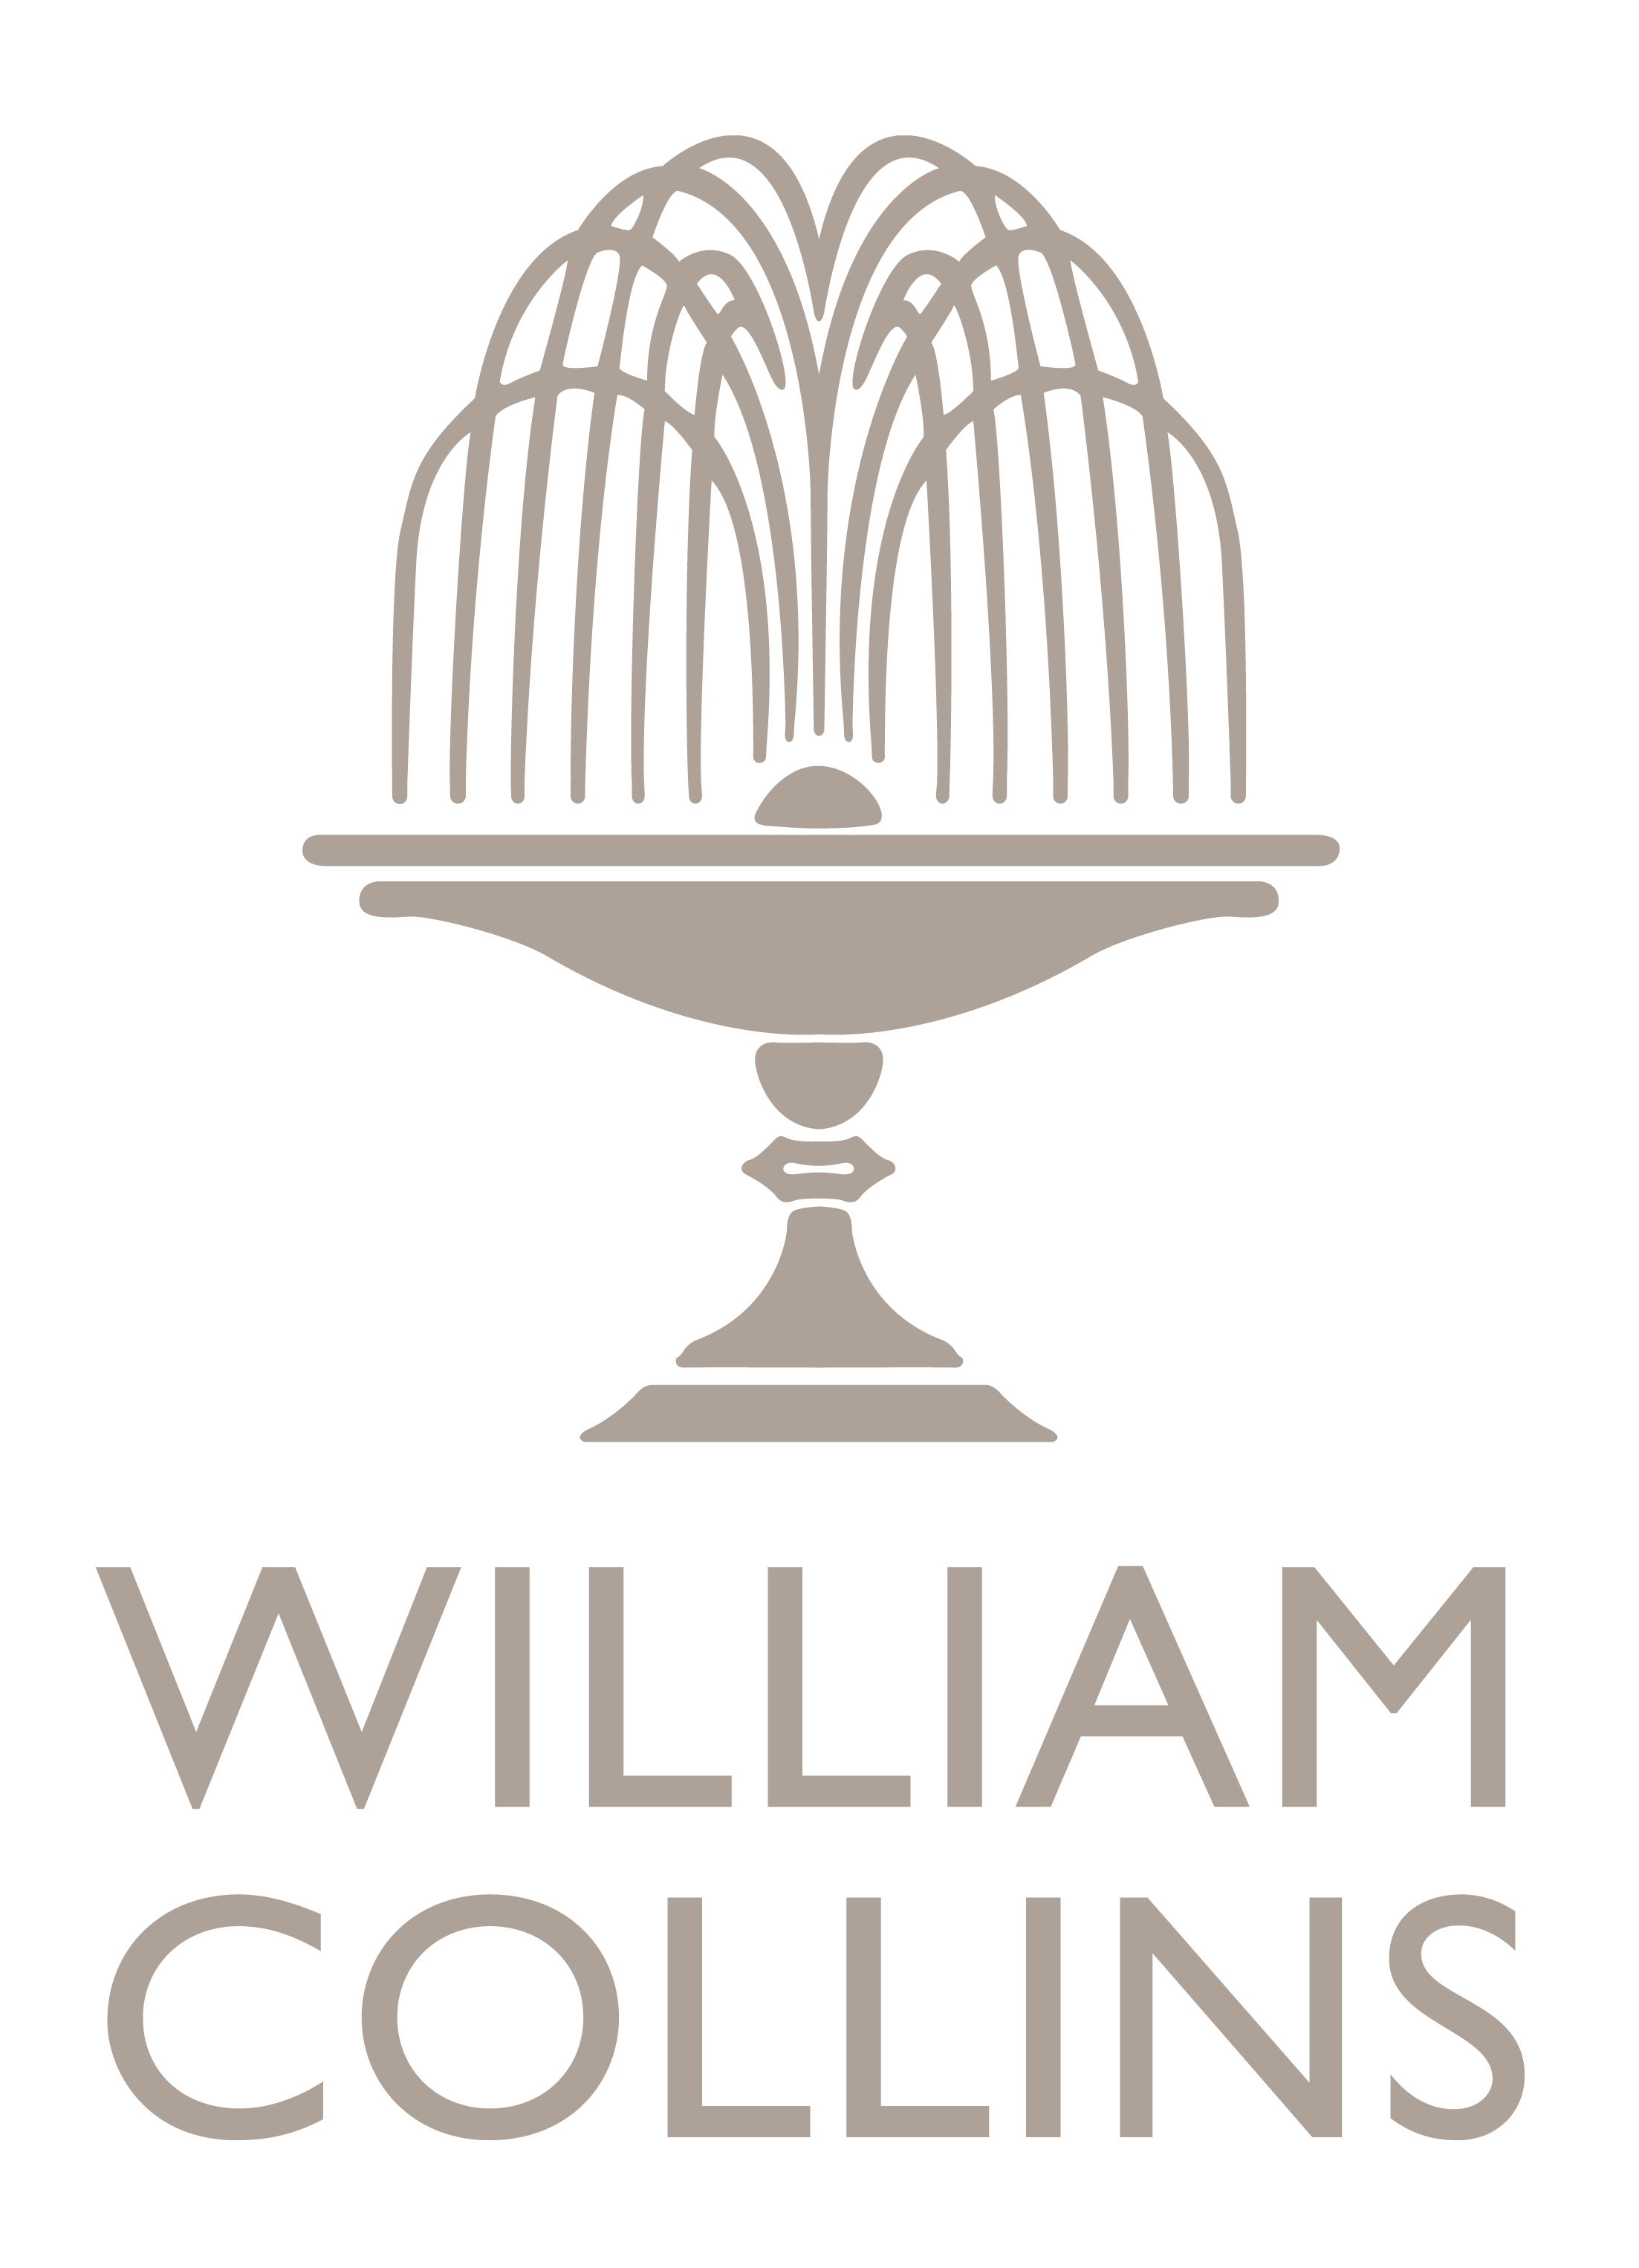 Williamcollins_logo_GRY.png